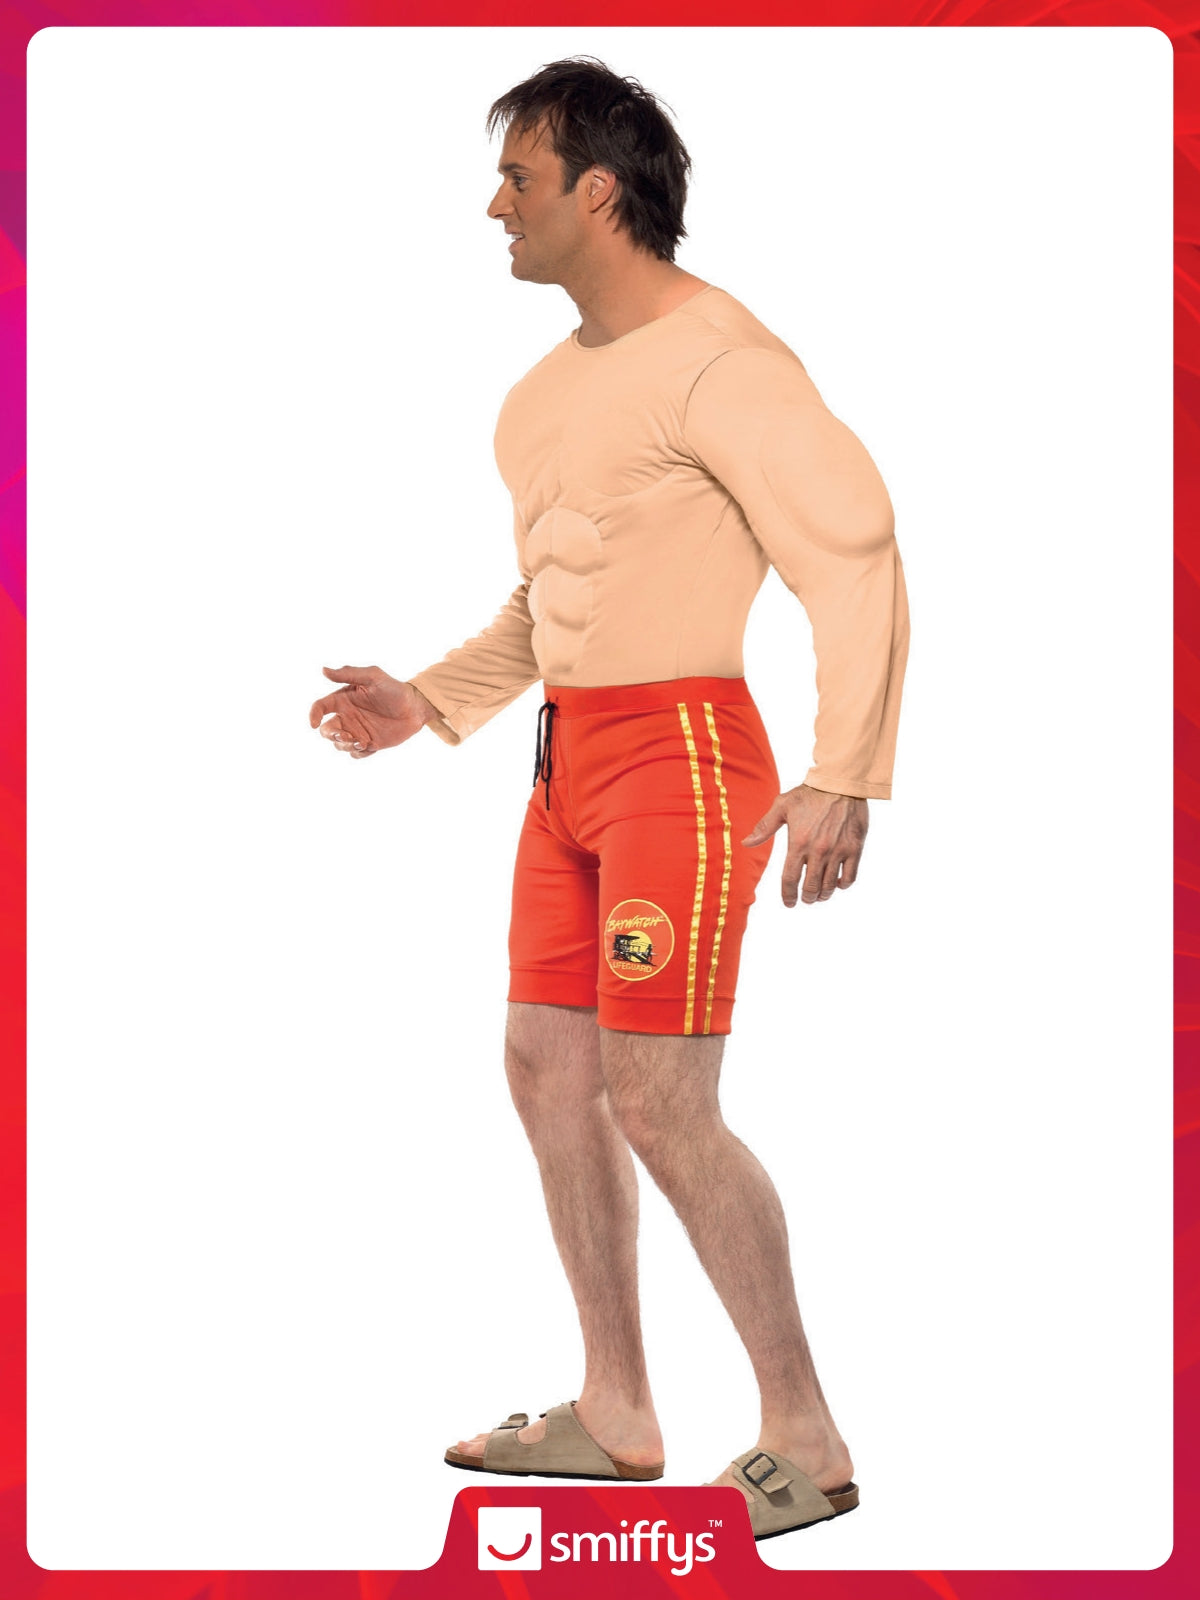 Baywatch Lifeguard Costume with Muscle Vest 4